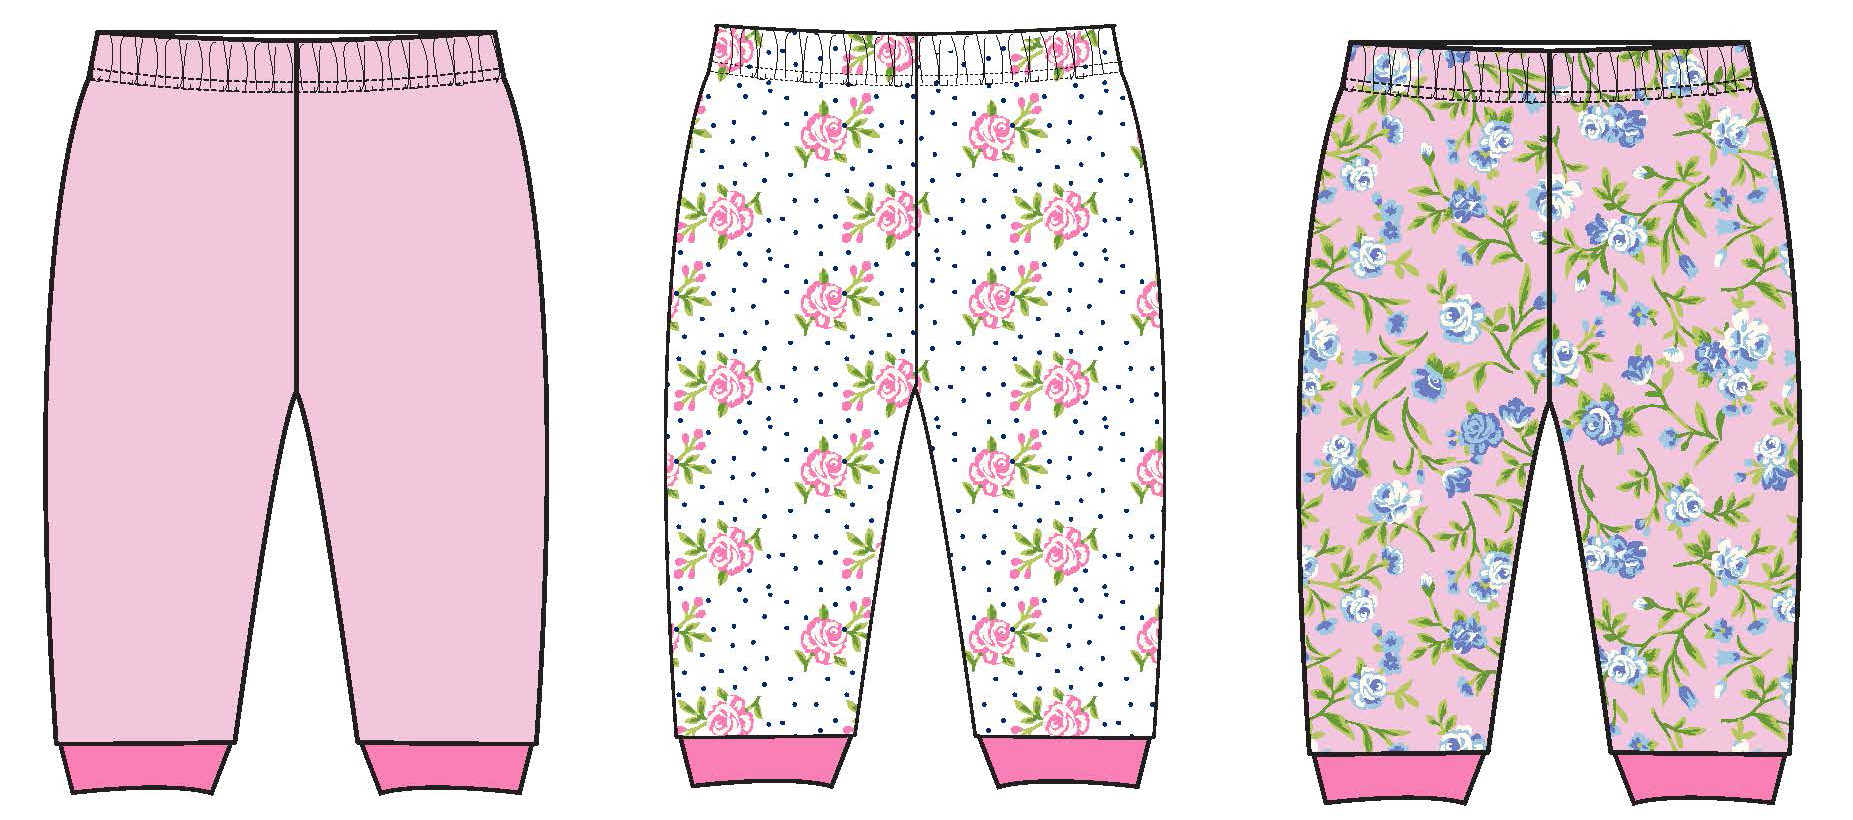 ''Baby Girl's Printed Pull-On PANTS w/ Daisy Flower, Polka Dot, & Solid Print -Sizes 0/3M-9M - 3-Pack